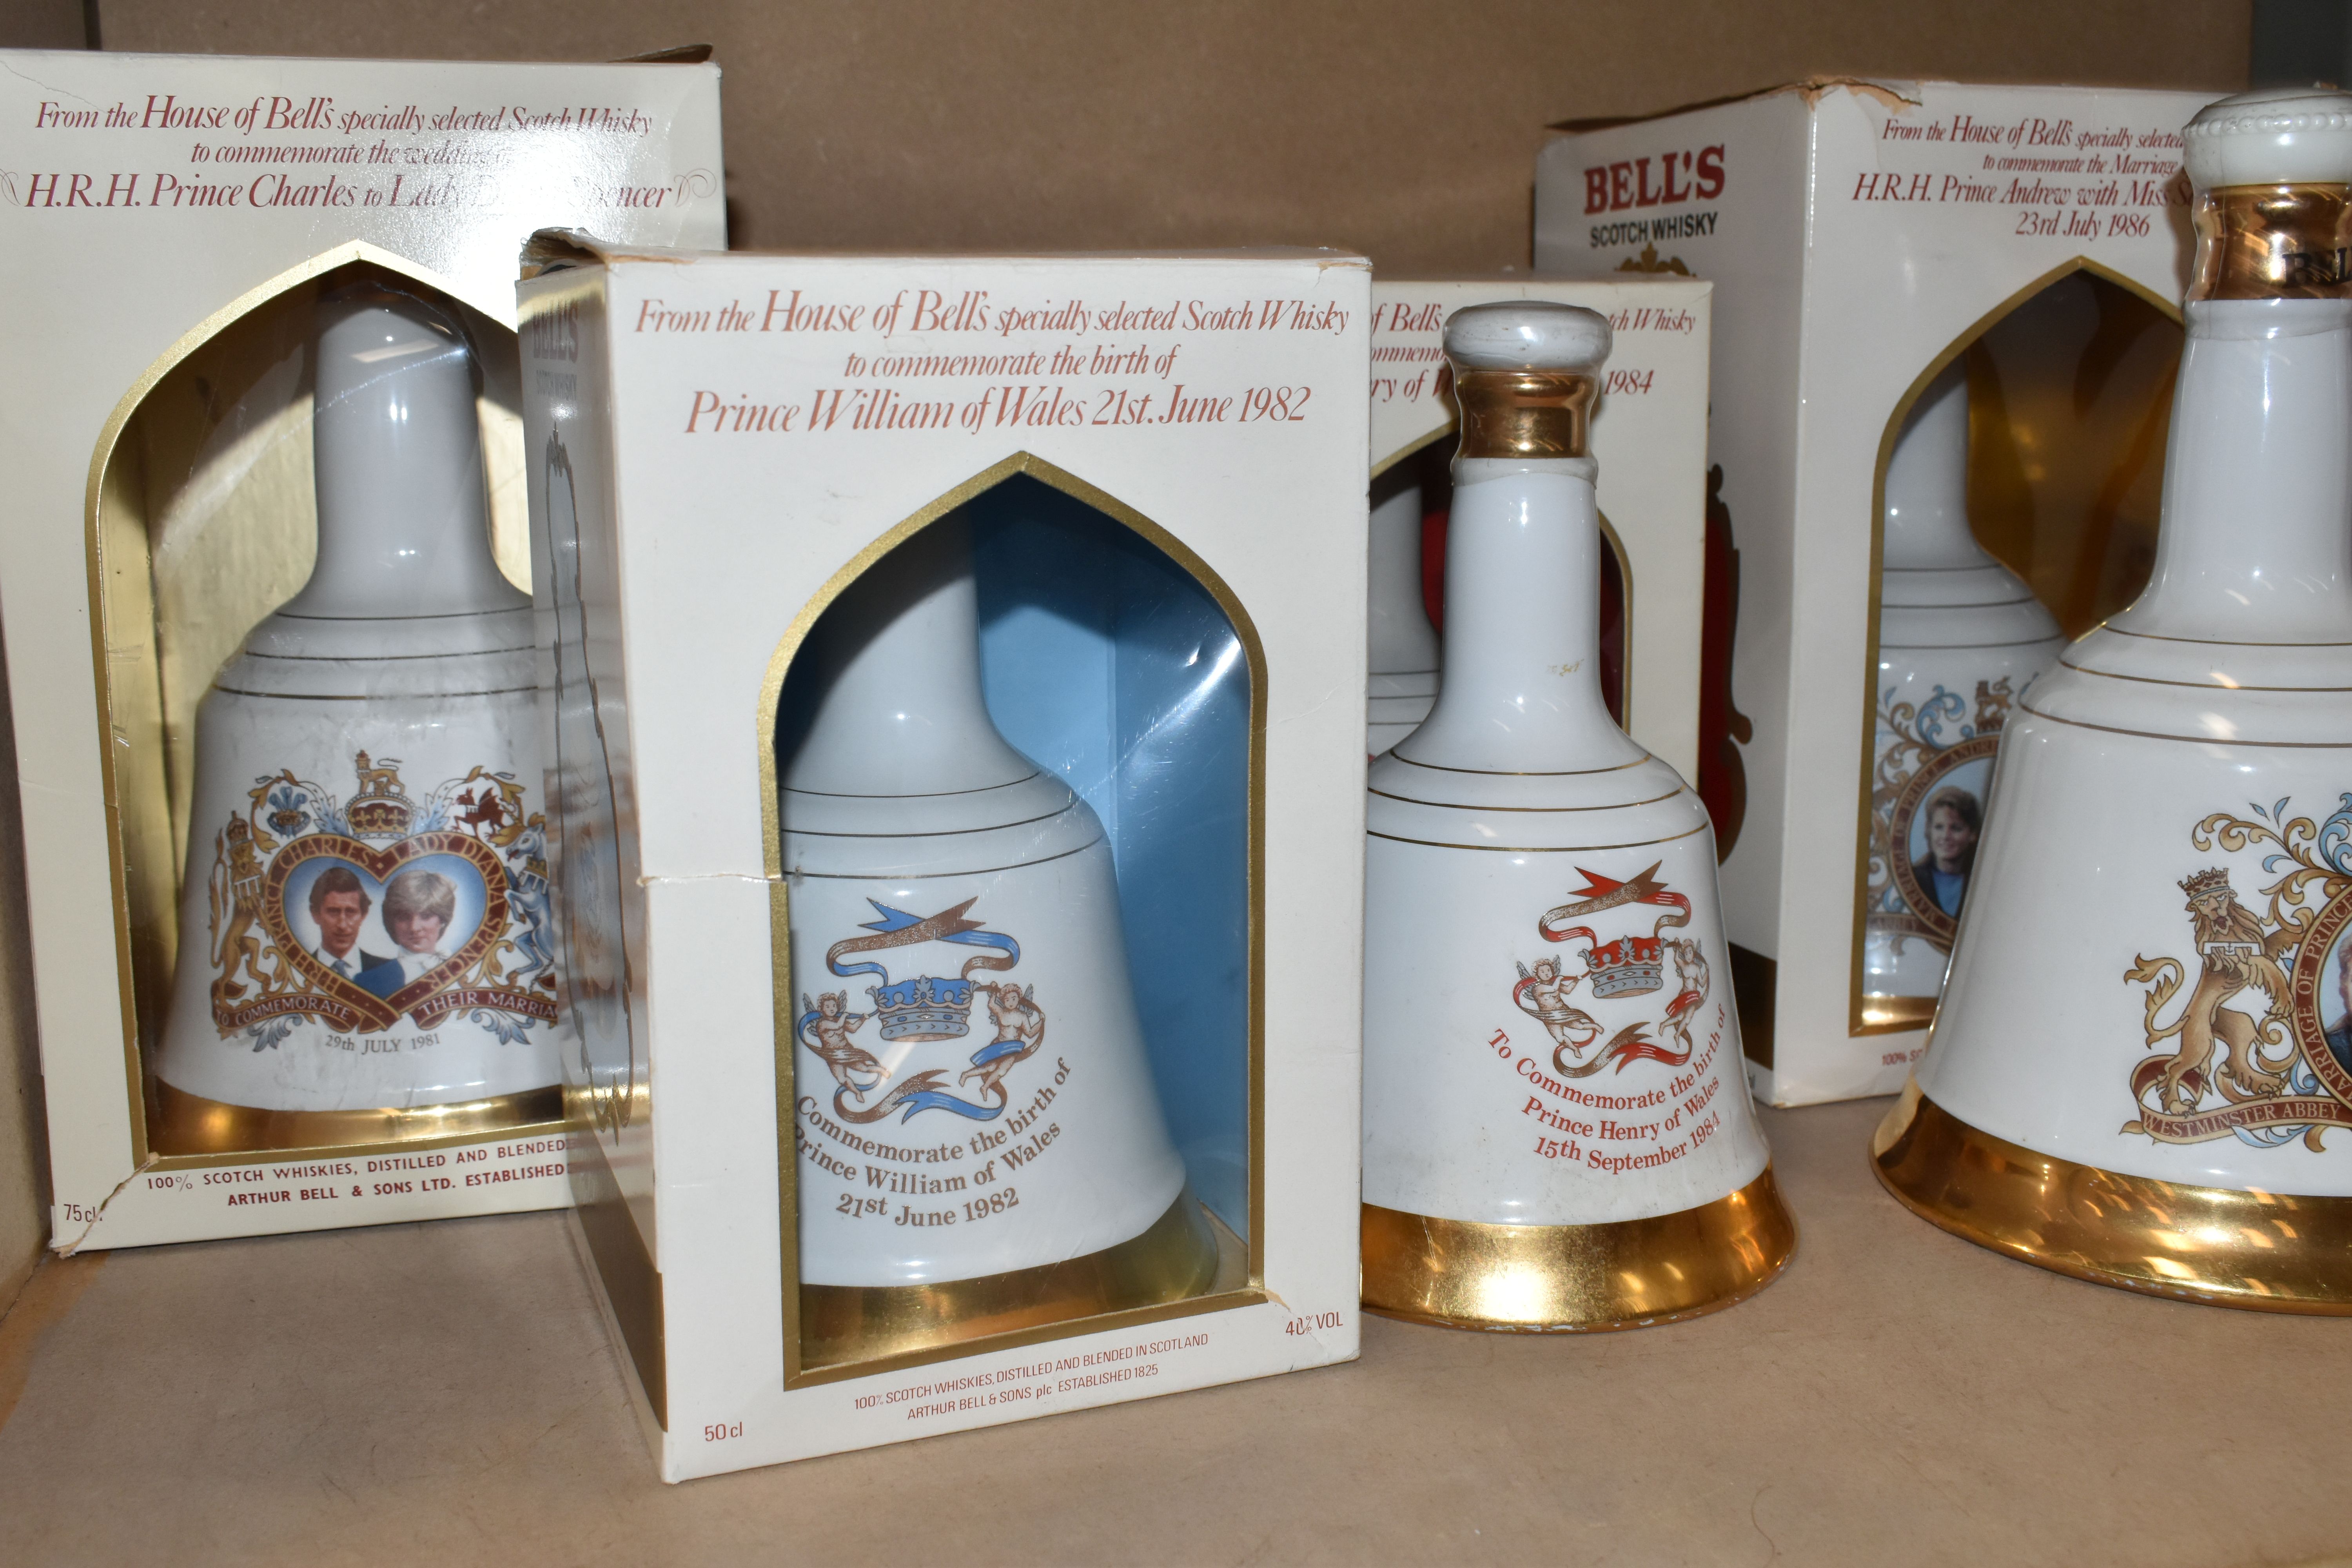 A COLLECTION OF SIXTEEN BELL'S WHISKY, COMMEMORATIVE WADE PORCELAIN DECANTERS, comprising The - Image 5 of 6